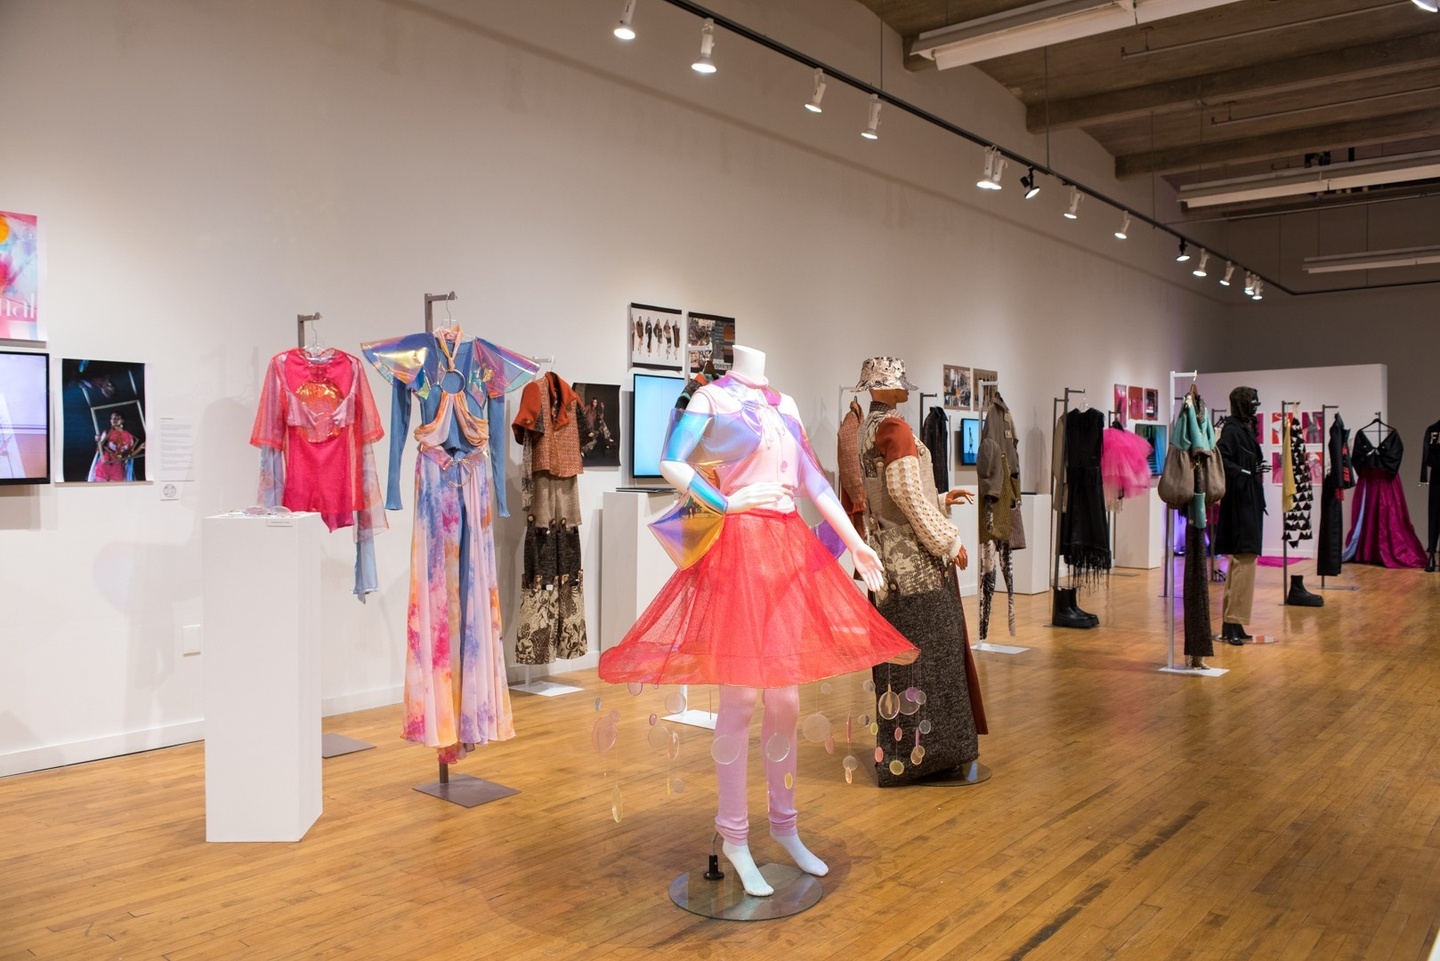 Gallery full of mannequins displaying fashion design garments.